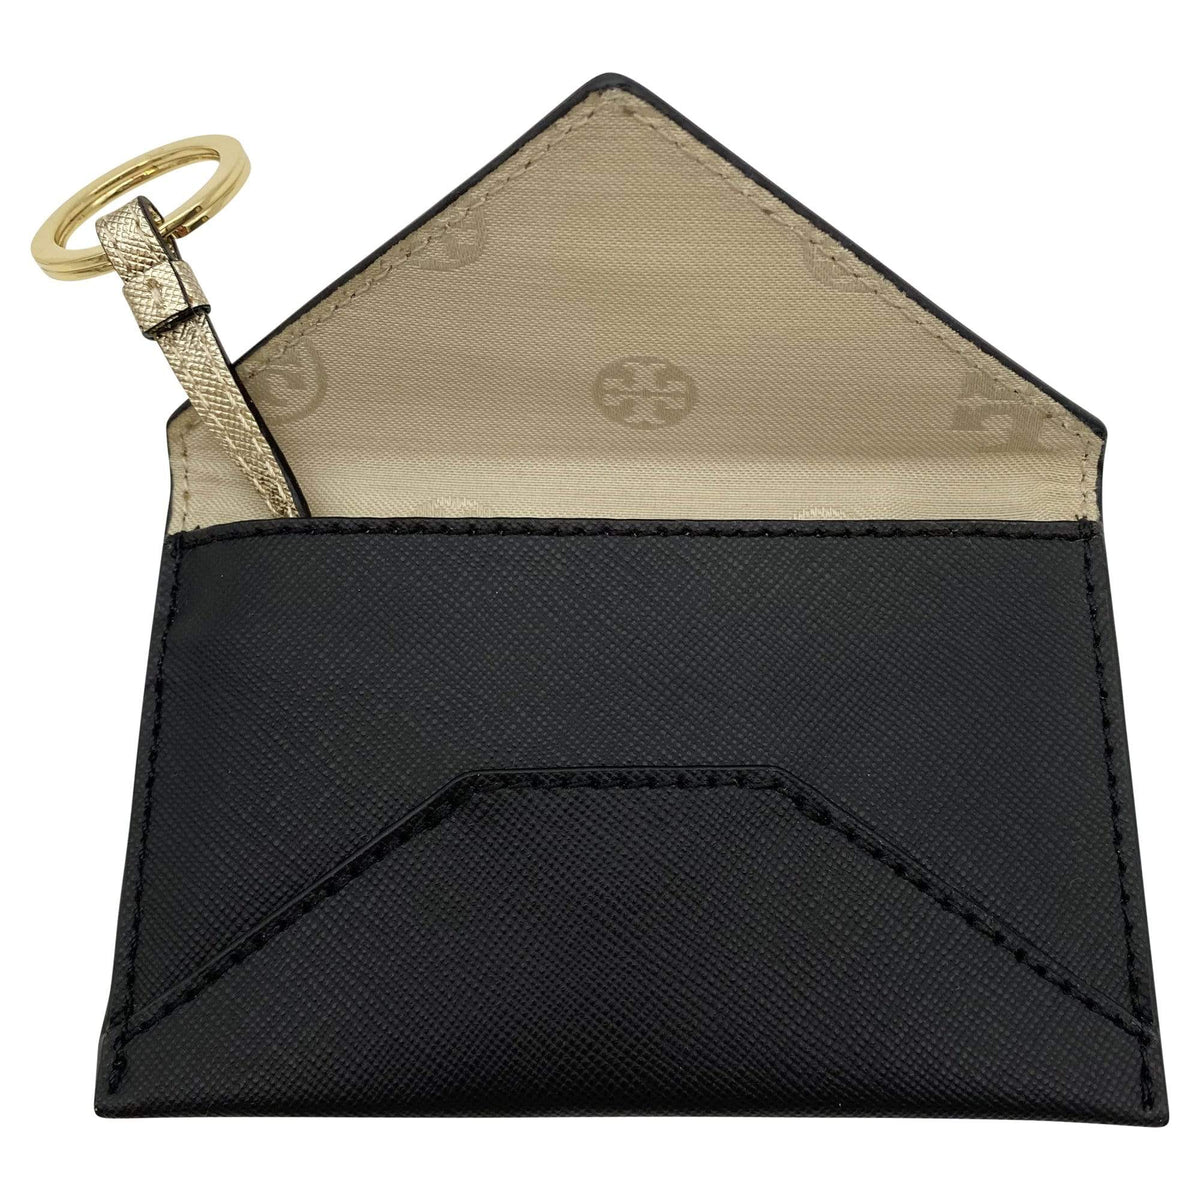 Robinson Patent Leather Bag by Tory Burch Accessories for $20